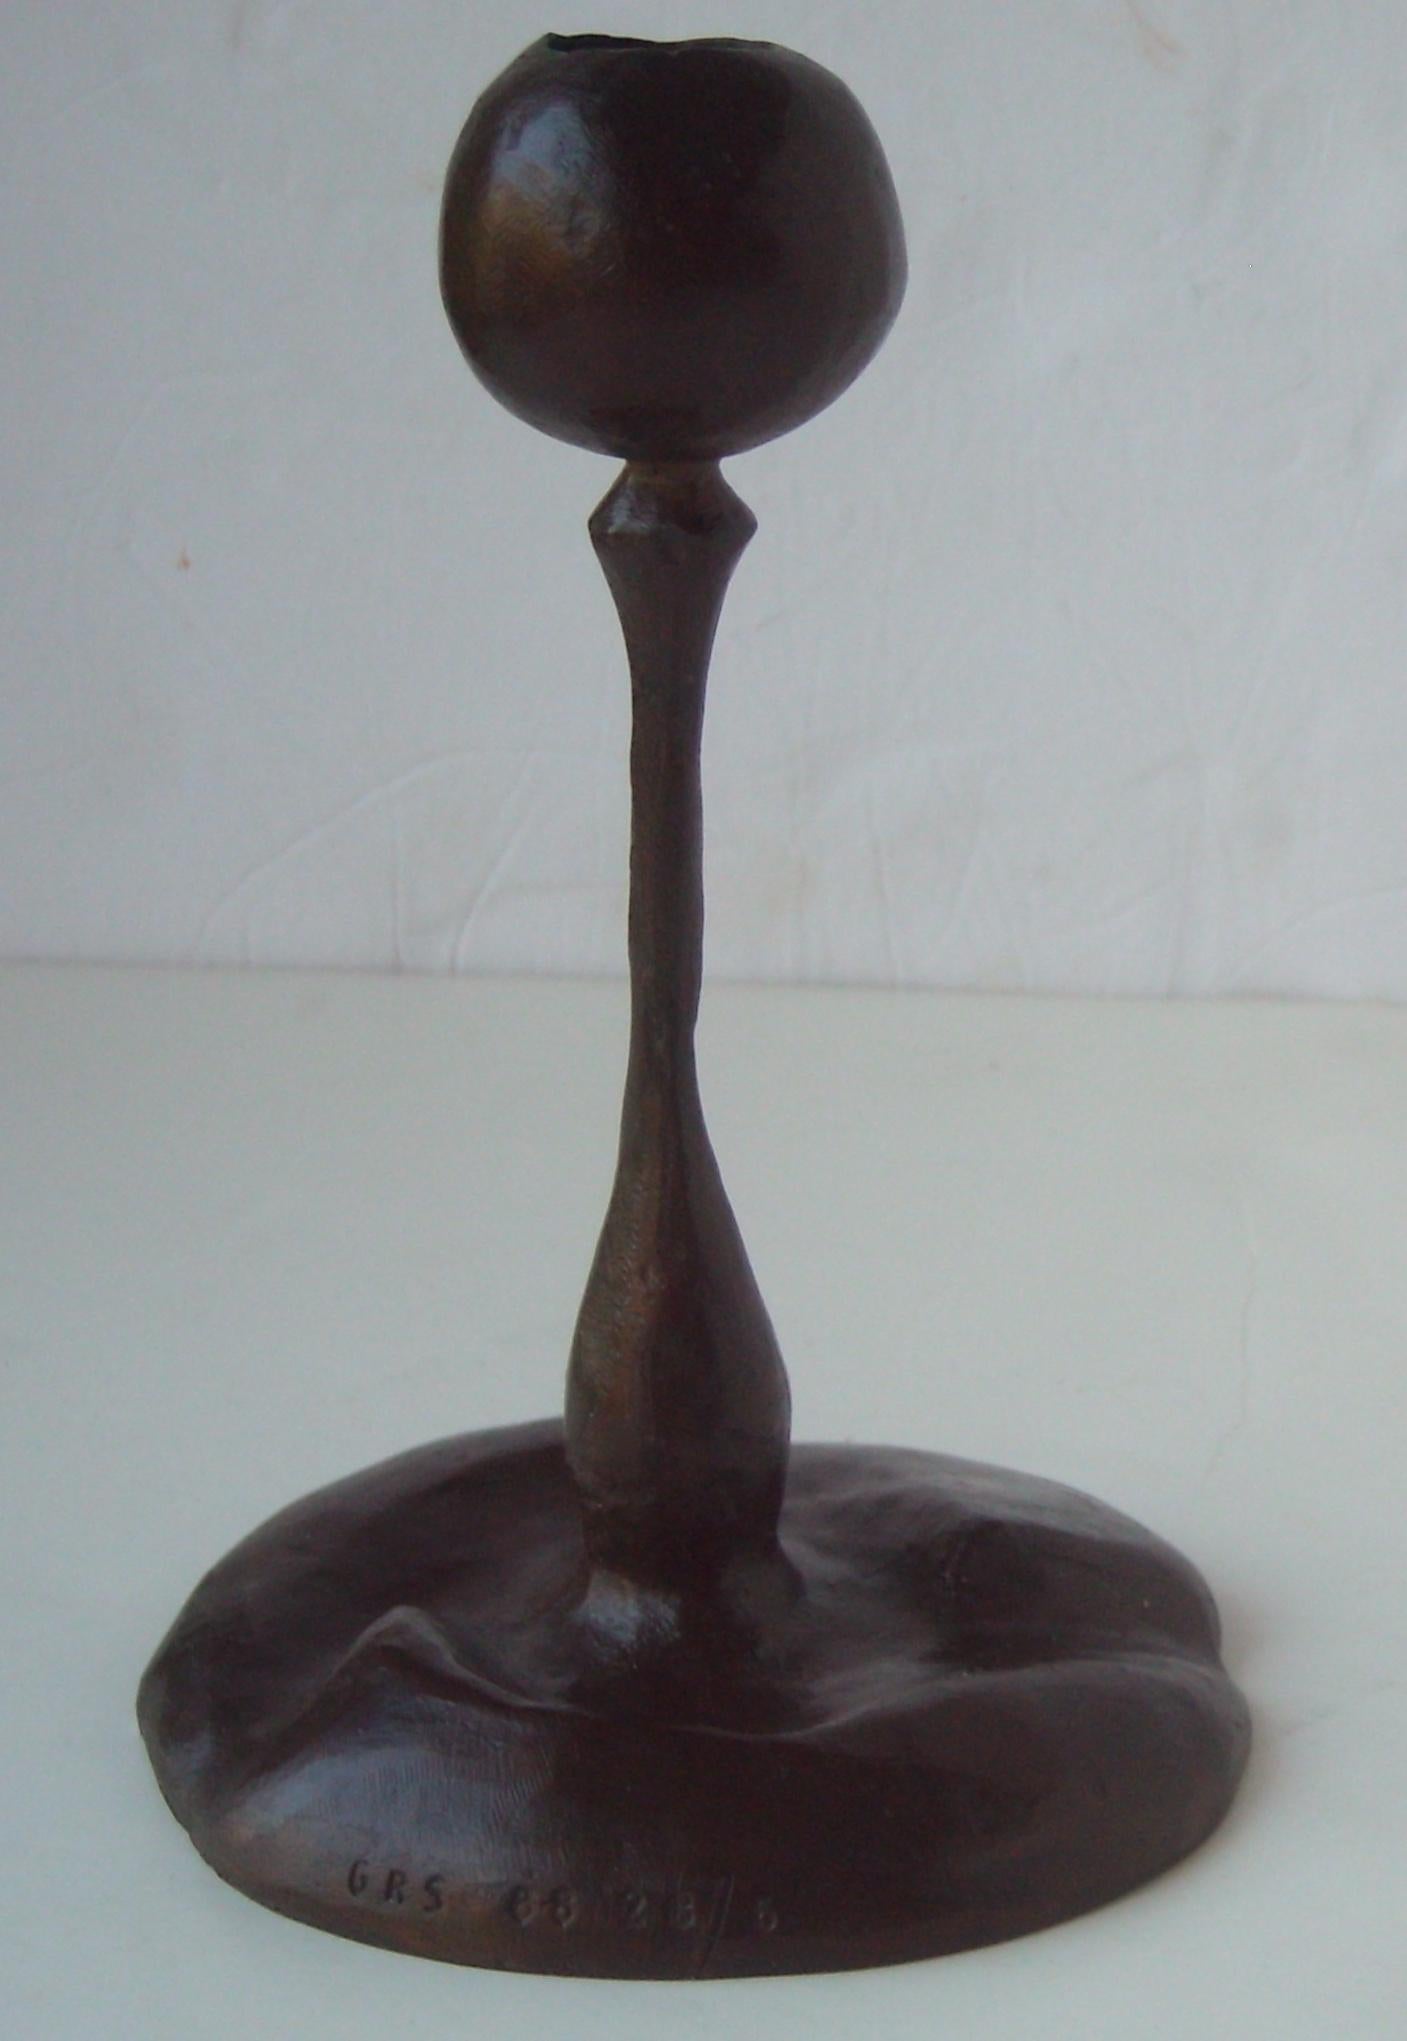 Very nice candlestick or sculpture by the well known architect / designer Gene R Summers. Dated 88 and marked 2B/6.